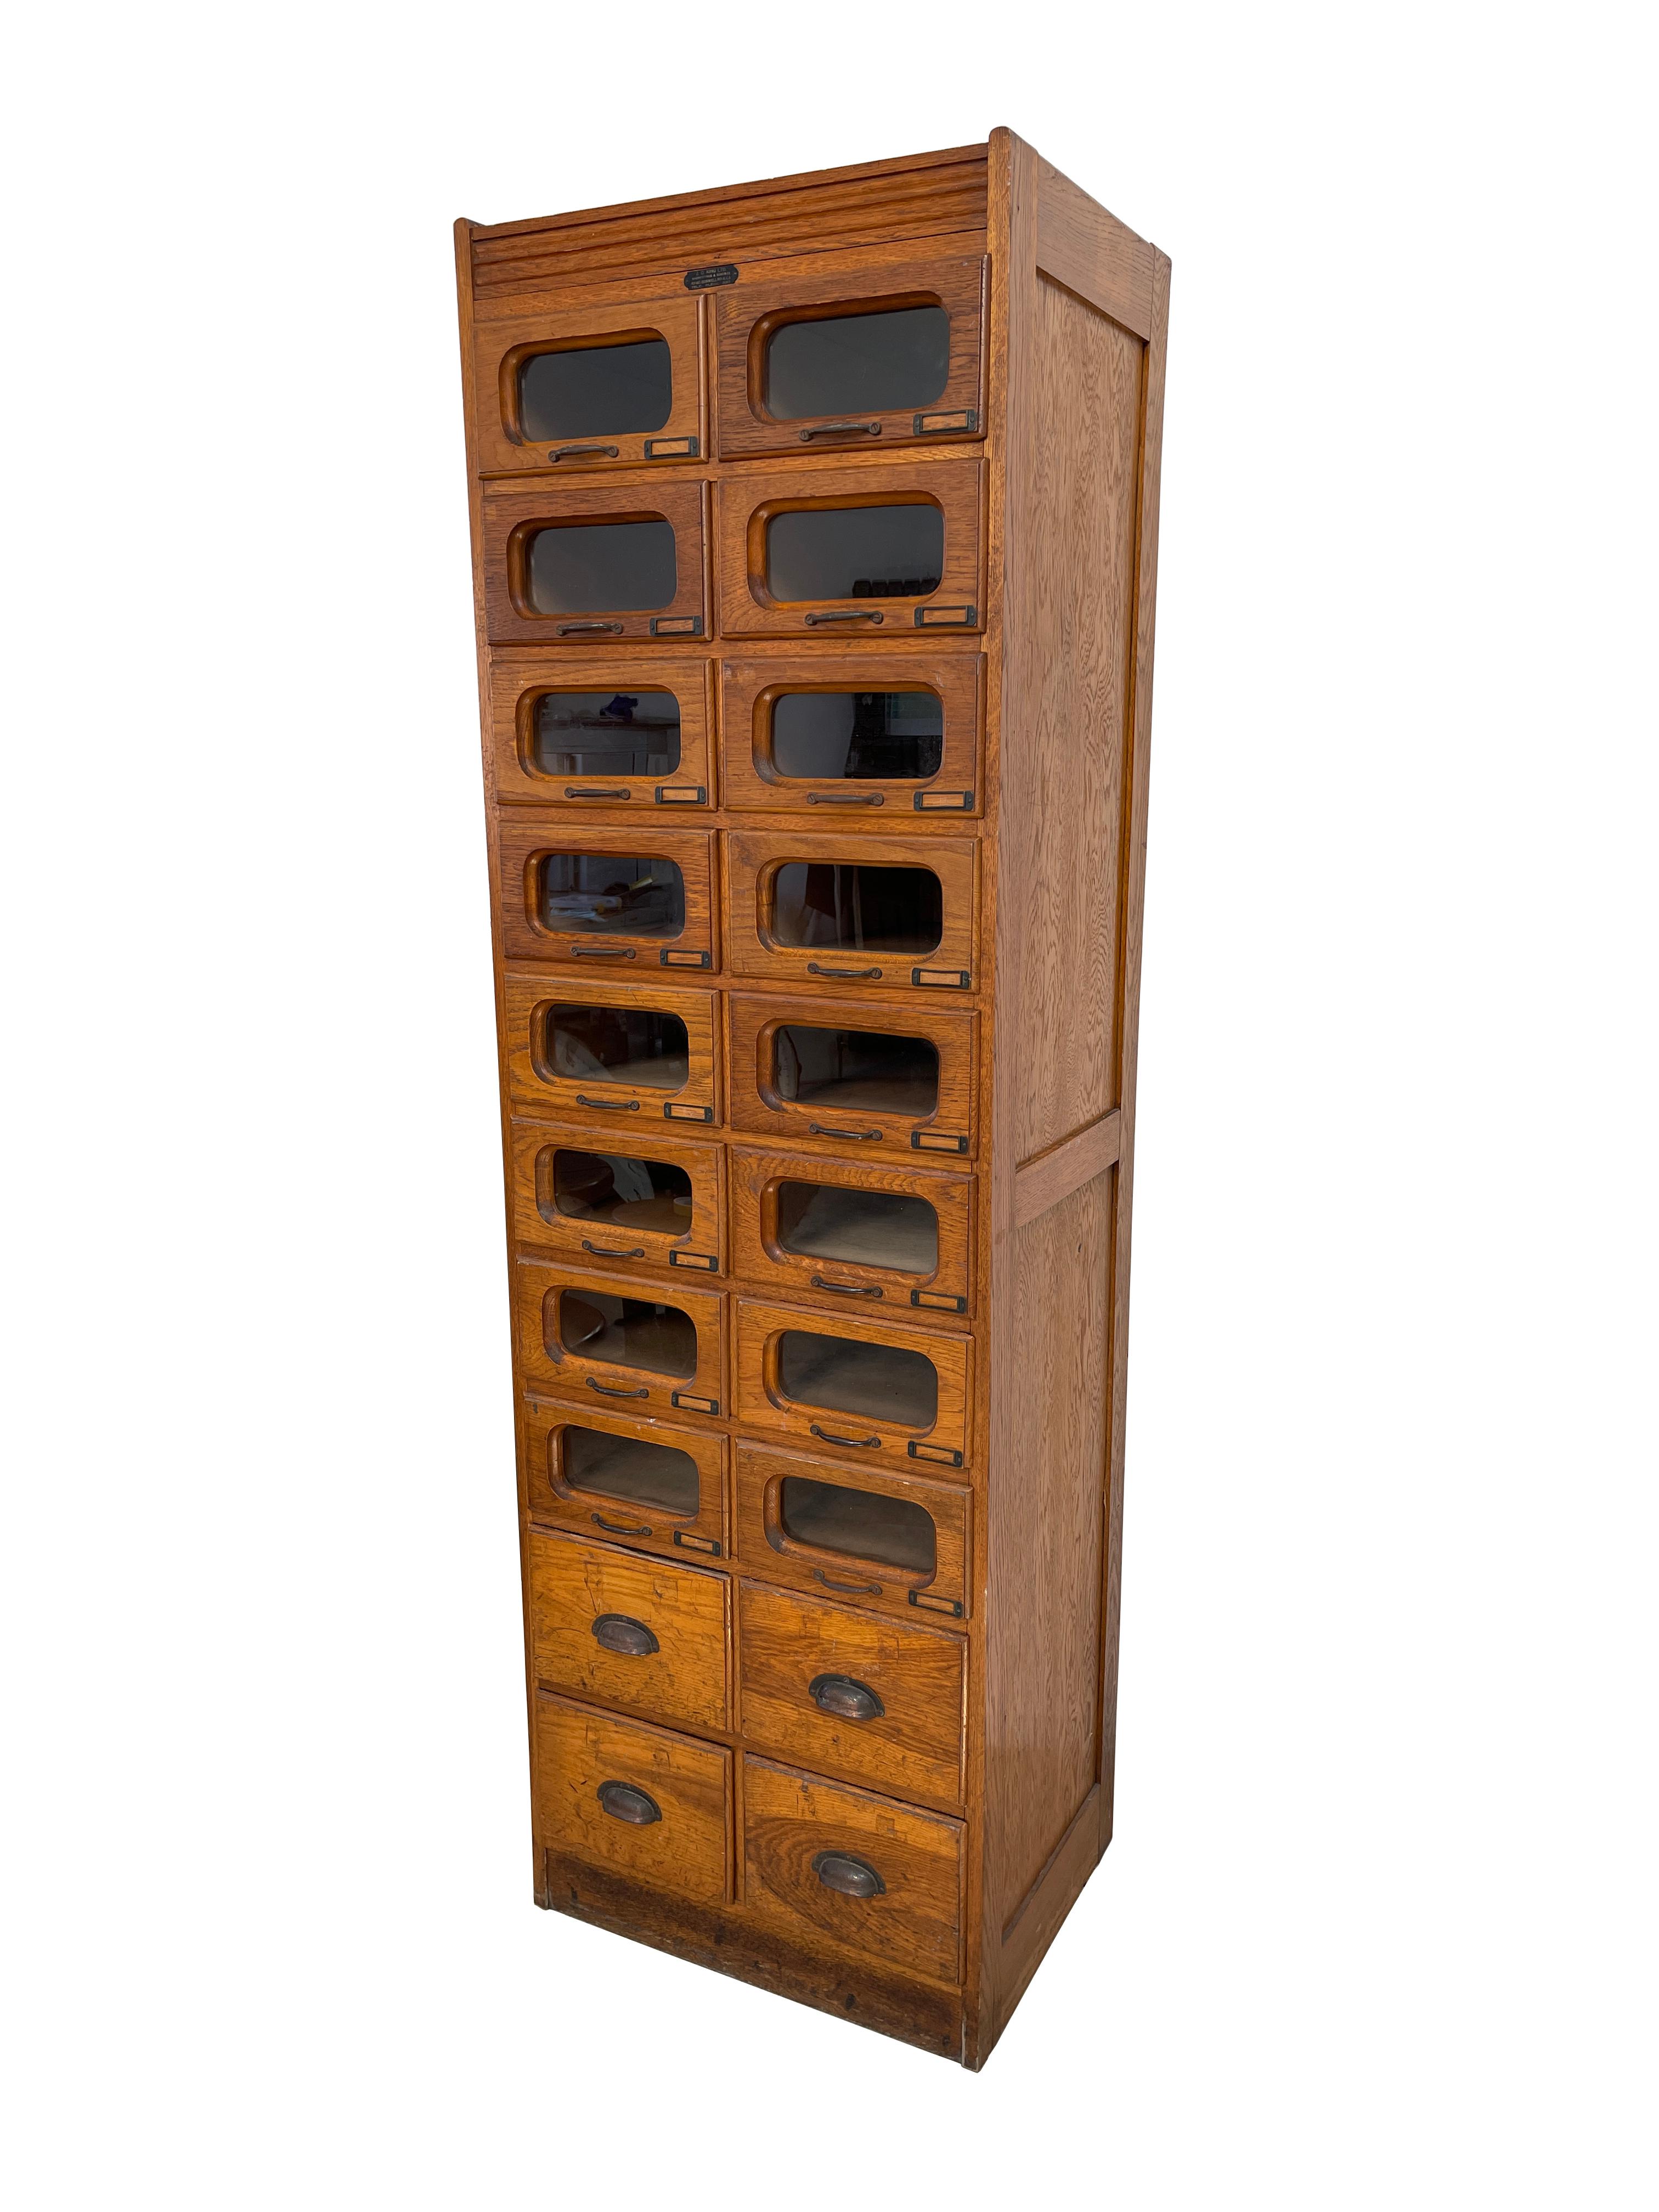 - A beautiful set of tall oak haberdashery drawers, circa 1930. 
- The cabinet is marked by illustrious manufacturers 'J. C. KING LTD. Shopfittings & Sundries 42-60, Goswell Rd, E.C.I. TELE, CLERK. 2317'.
- A total of 16 glazed drawers with